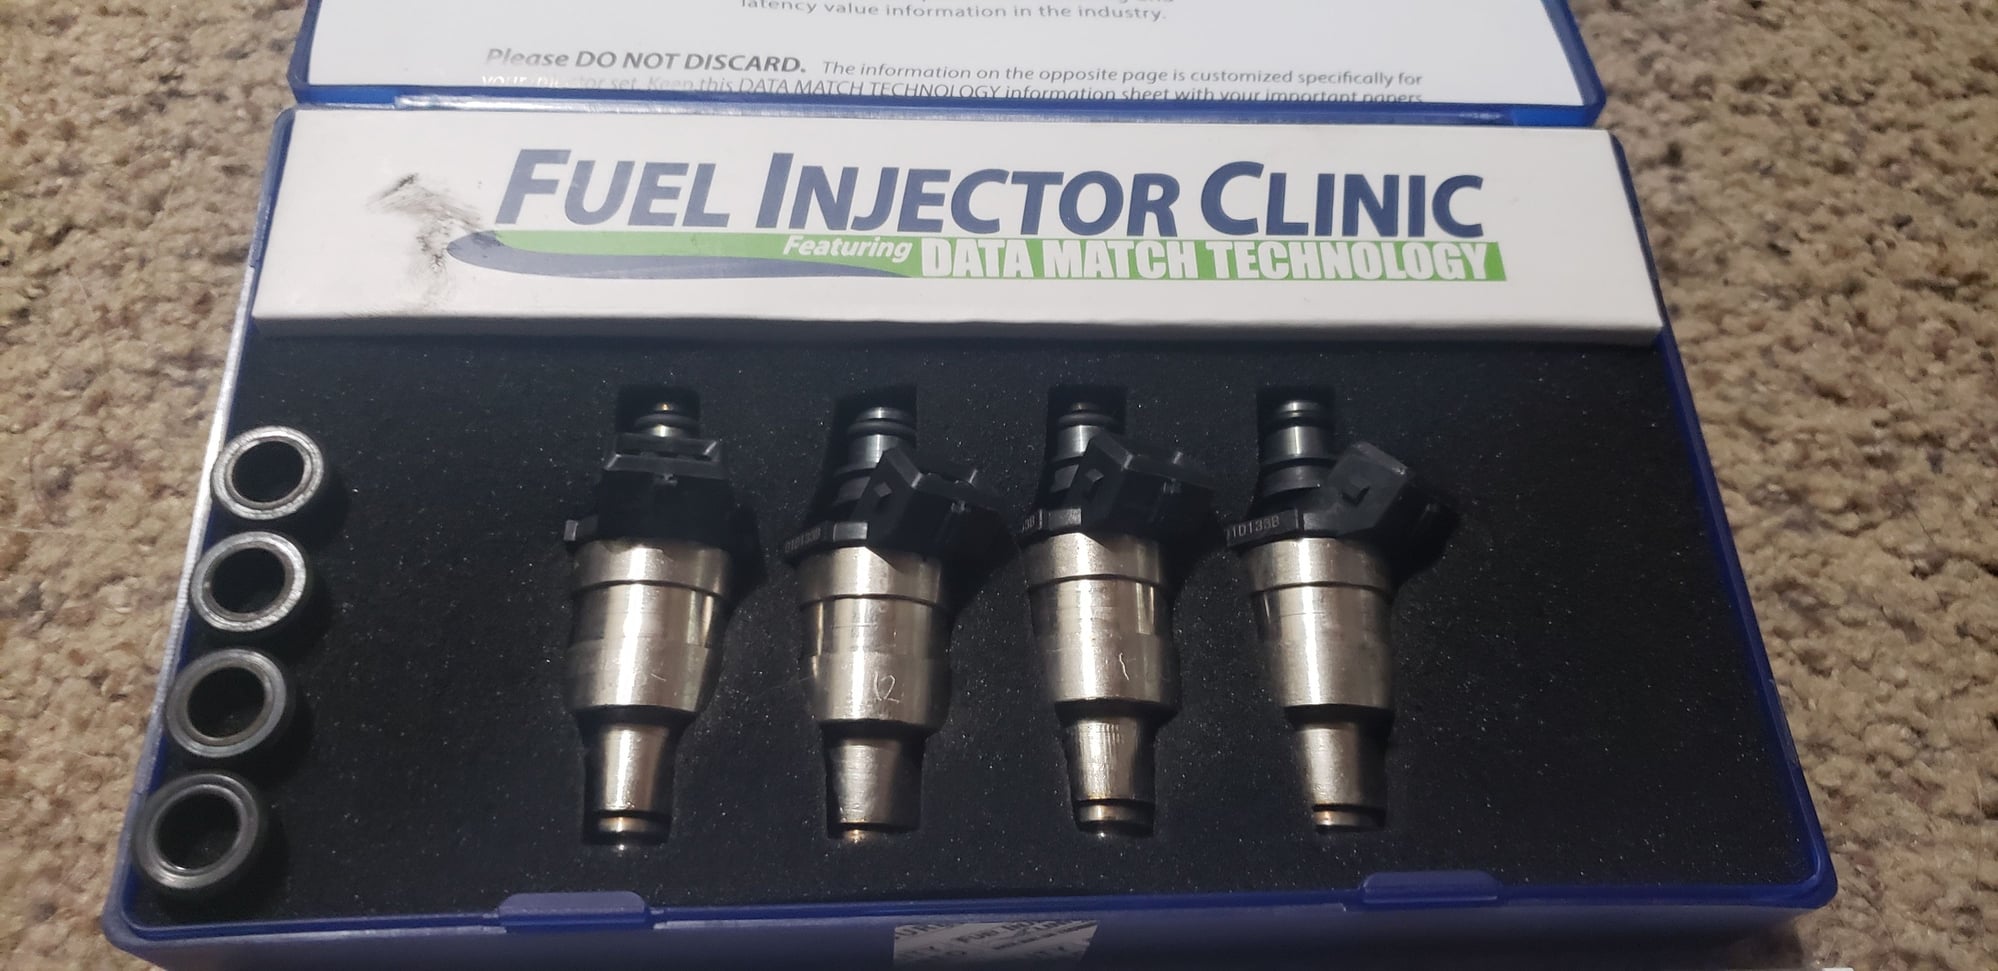 Engine - Intake/Fuel - FIC 1220 low z injectors - used for 500 miles / 1 month old - New - San Bernardino, CA 92407, United States